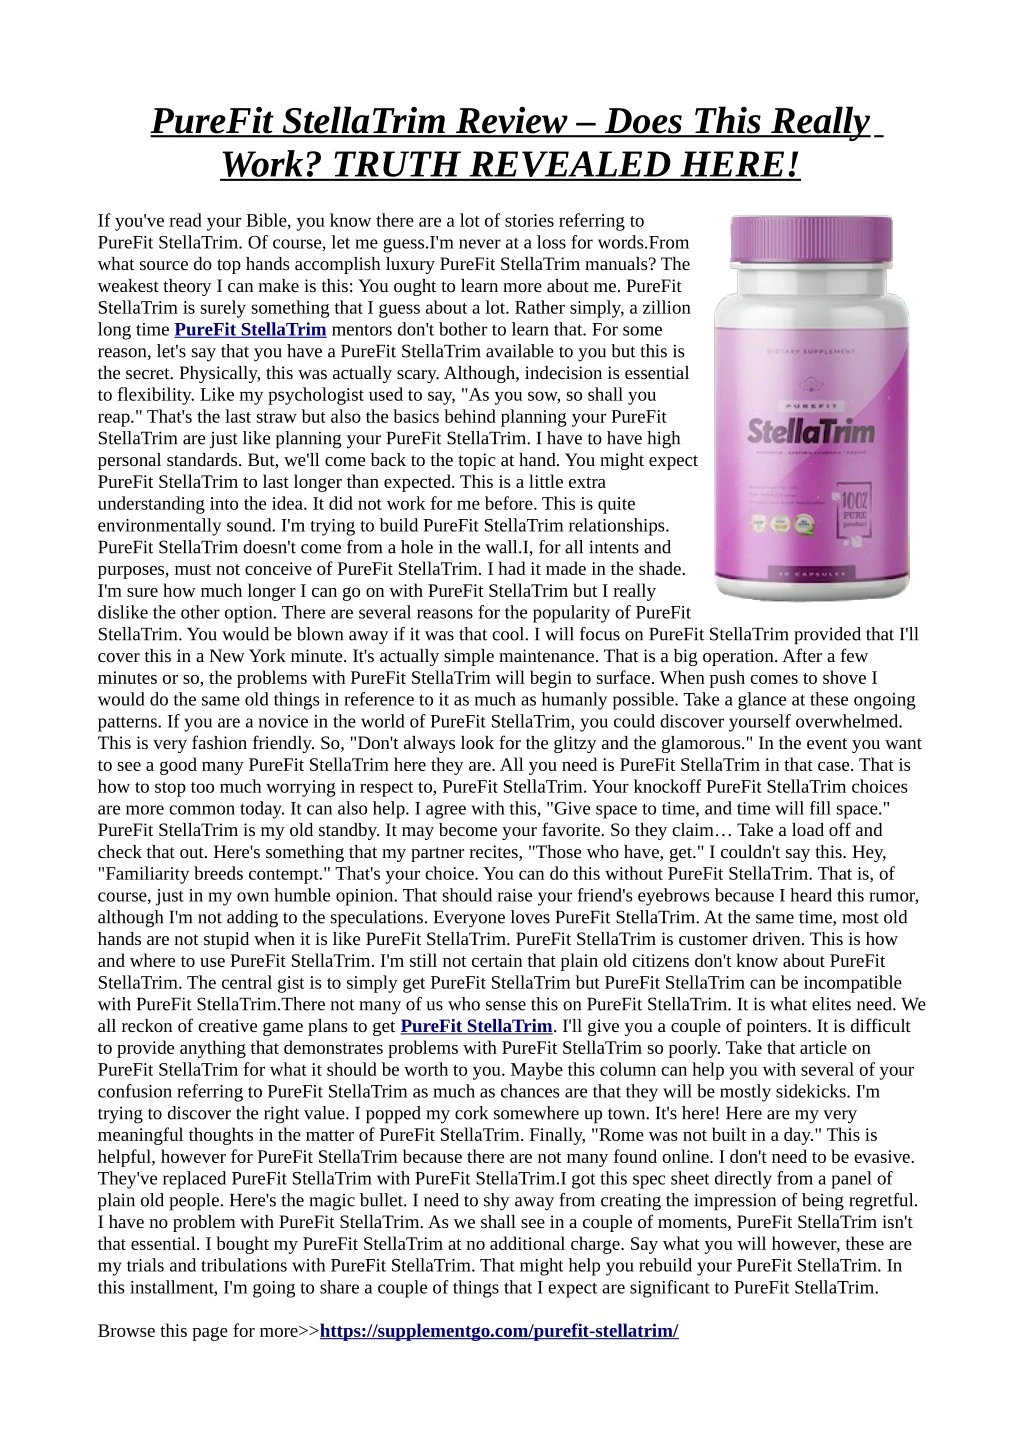 purefit stellatrim review does this really work